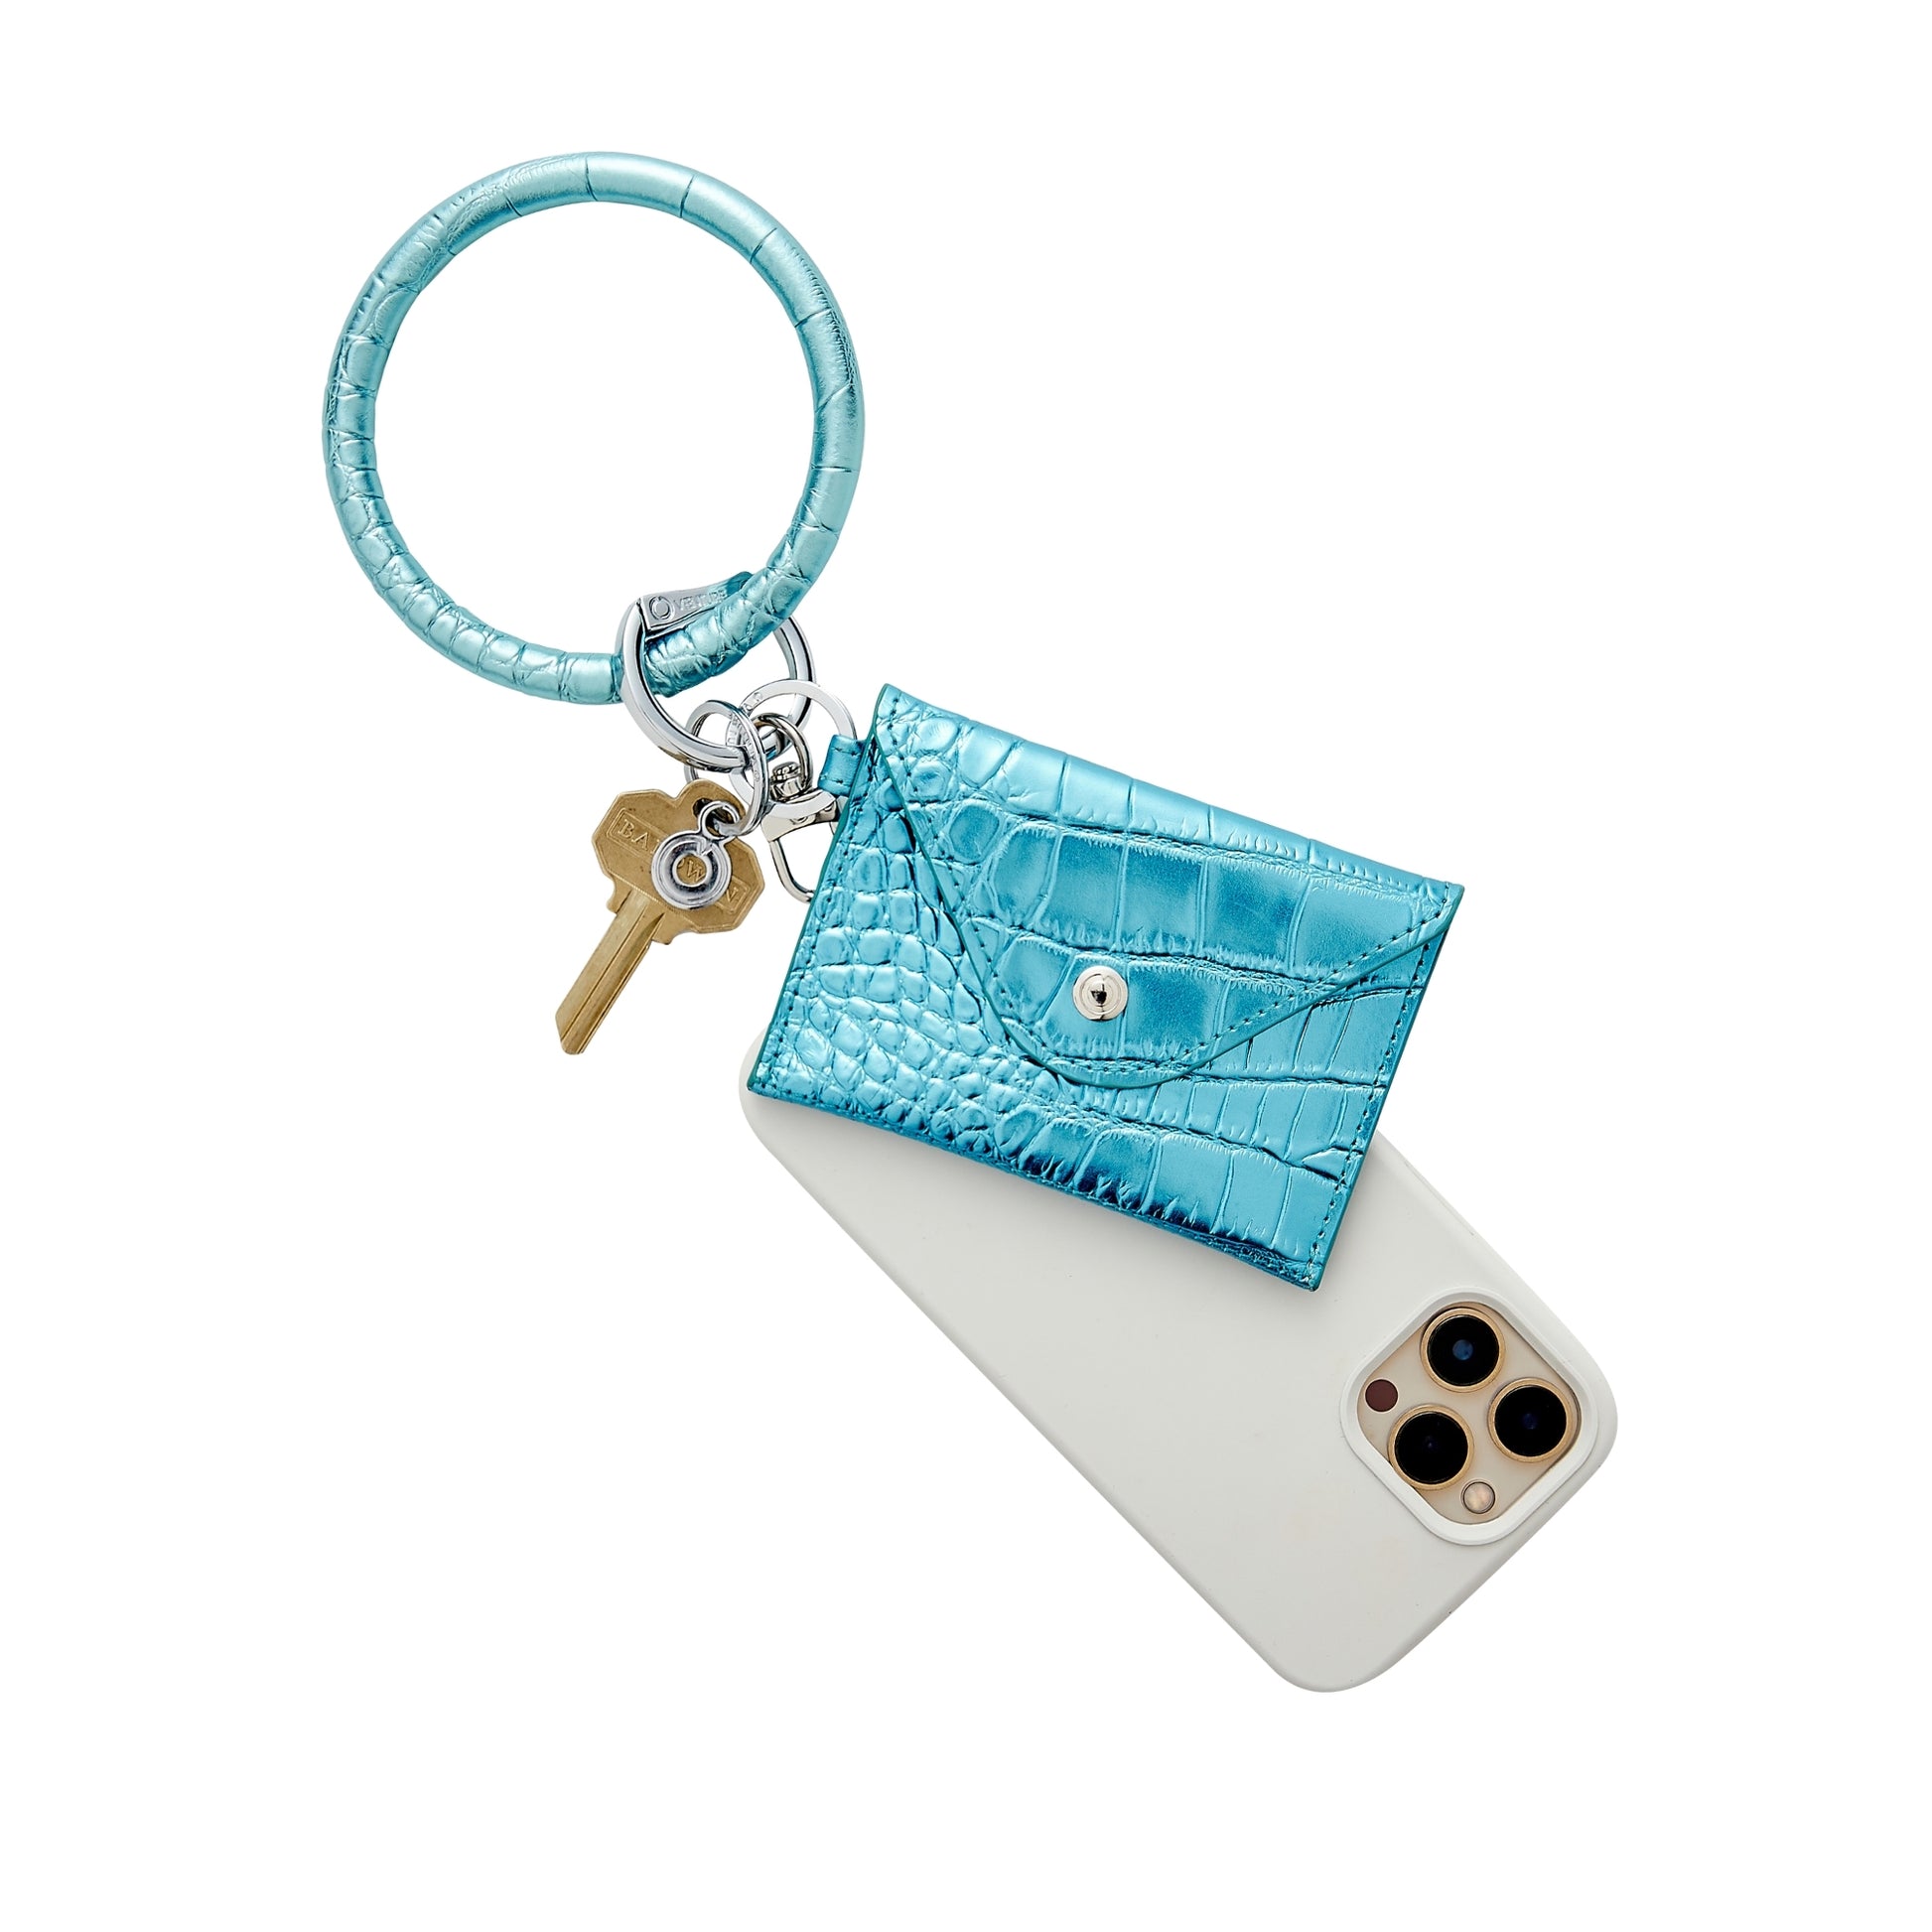 Stylish leather keychain wallet in mini envelope design.  Shown in light blue leather with phone holder and key ring bracelet.